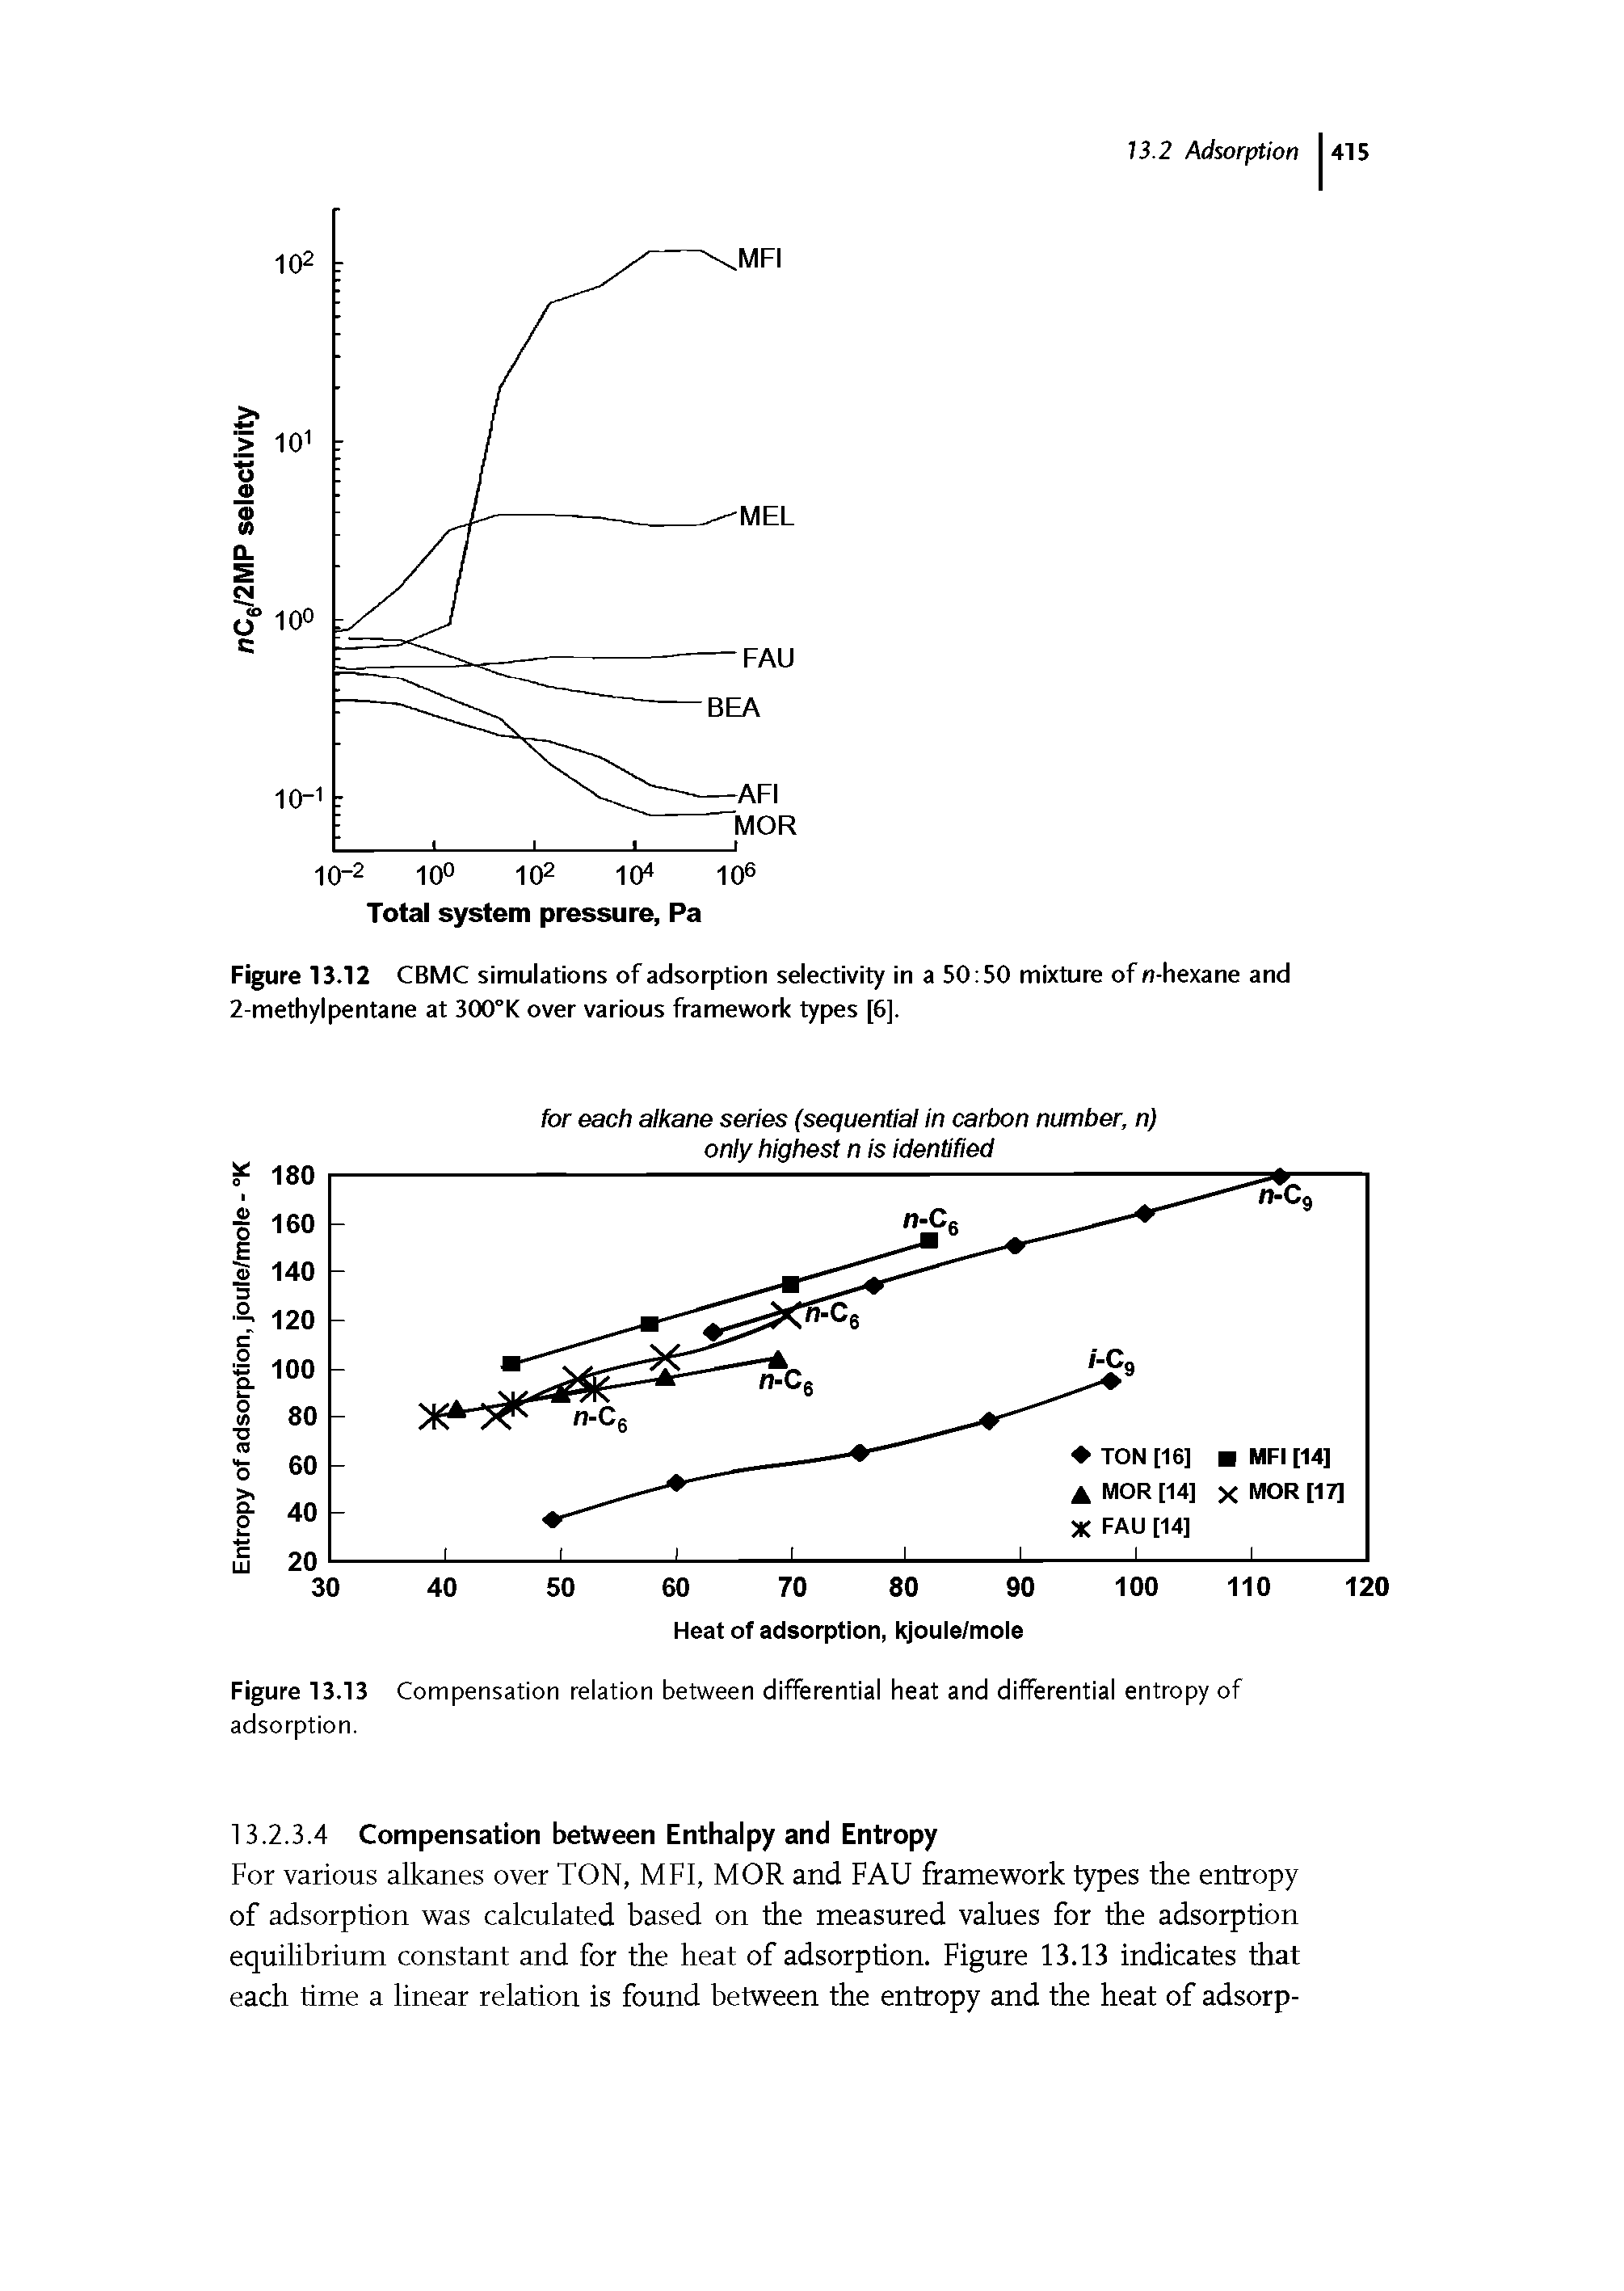 Figure 13.13 Compensation relation between differential heat and differential entropy of adsorption.